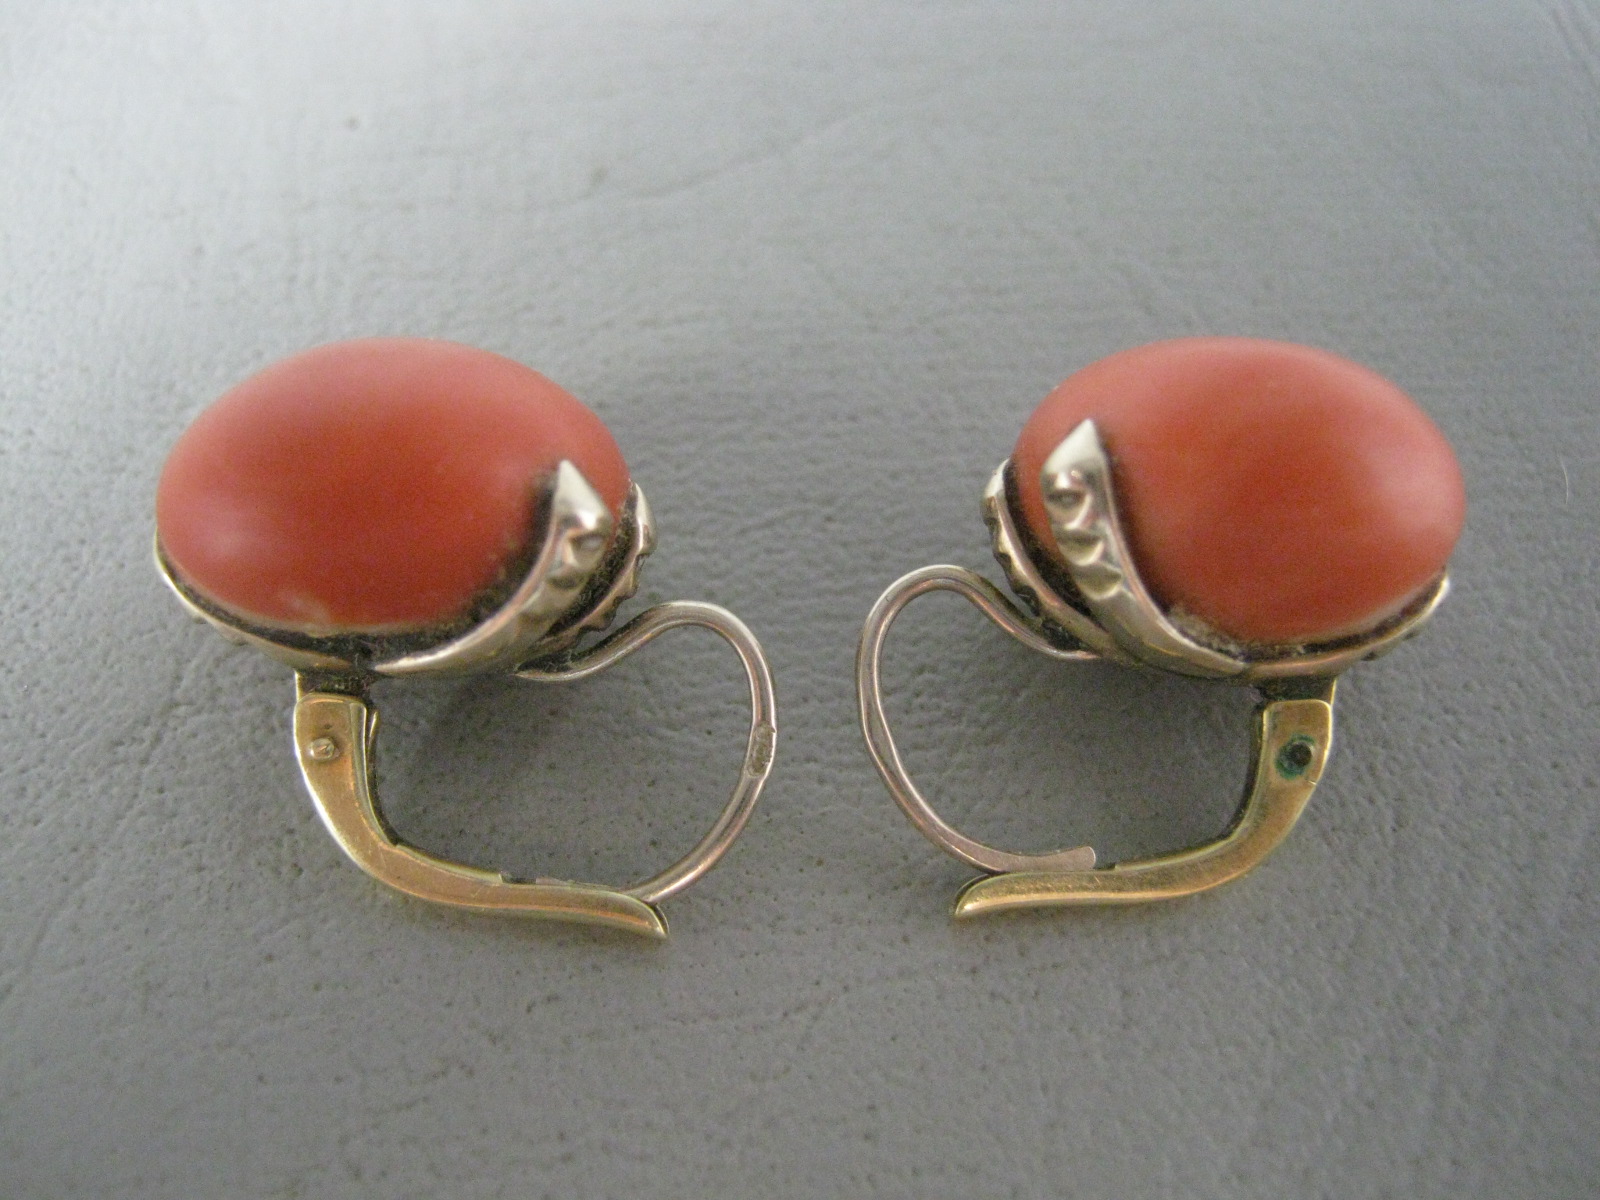 Vintage Antique 585 14K 14 Karat Yellow Gold Red Coral Earrings Estate Jewelry 1